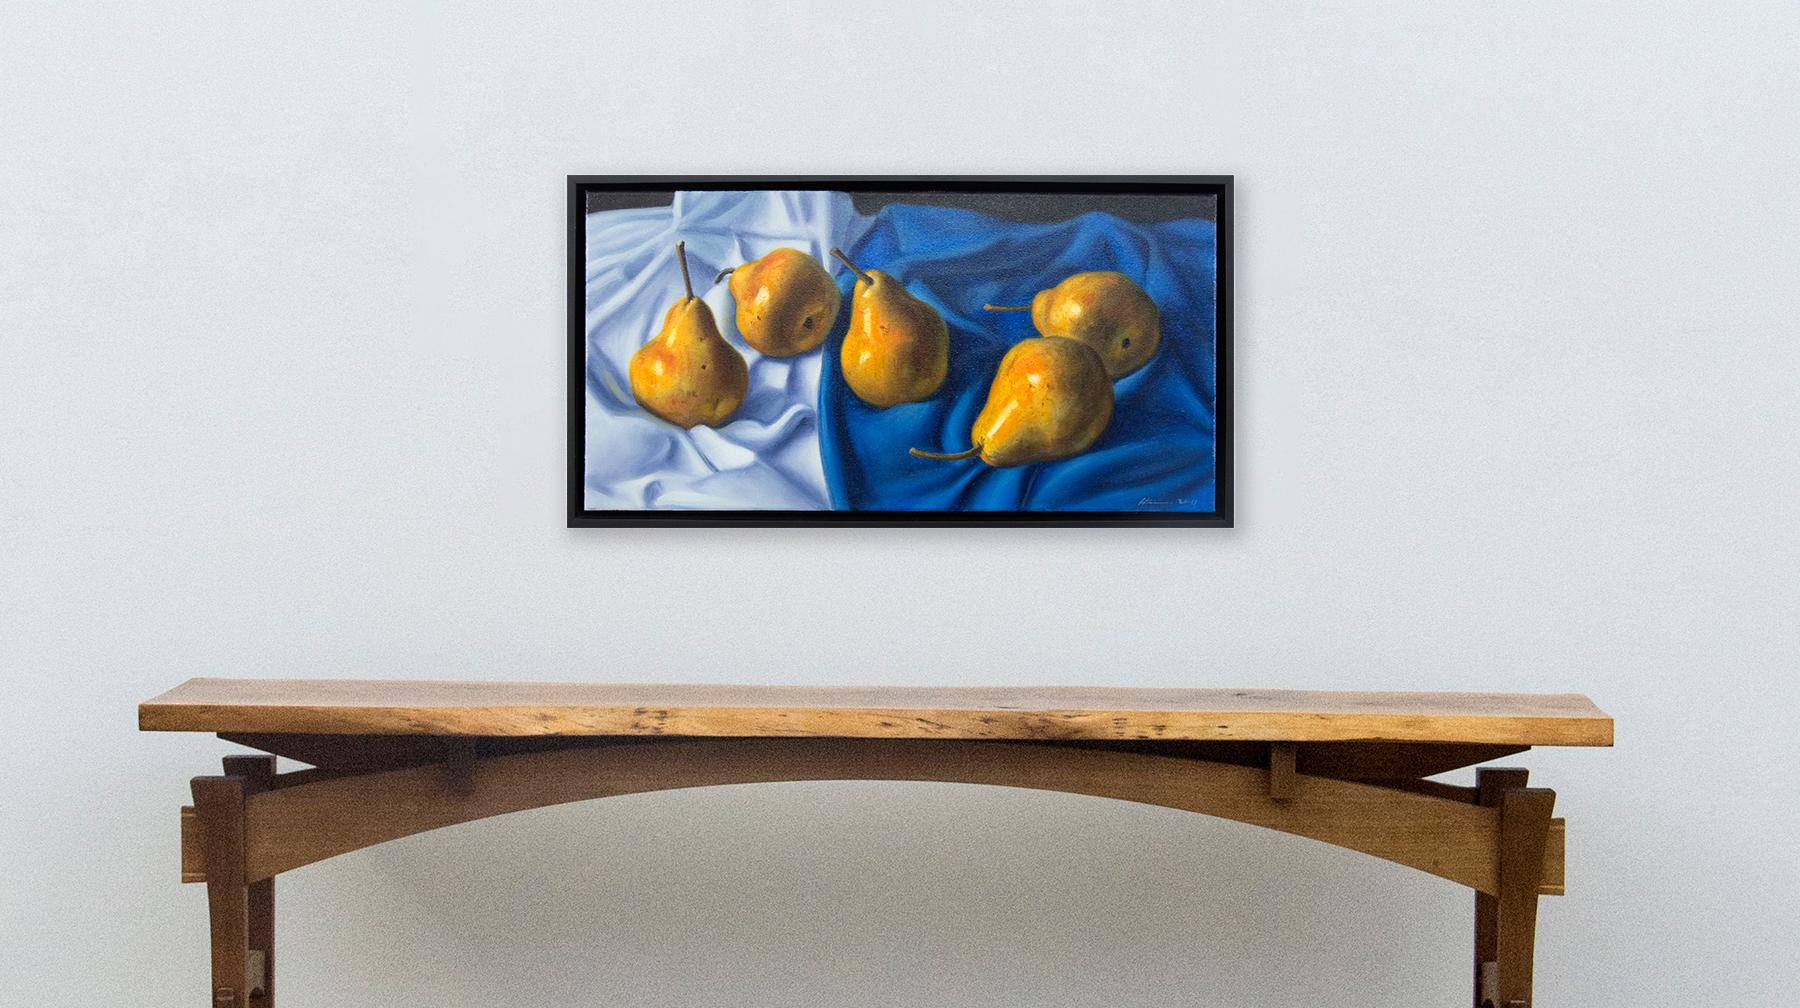 Luscious golden pears are arranged on a blue and white cloth in this realistically rendered and intimate oil painting on canvas by Ciba Karisik. In addition to the skillful use of trompe l'oeil, the artist has heightened the importance of the